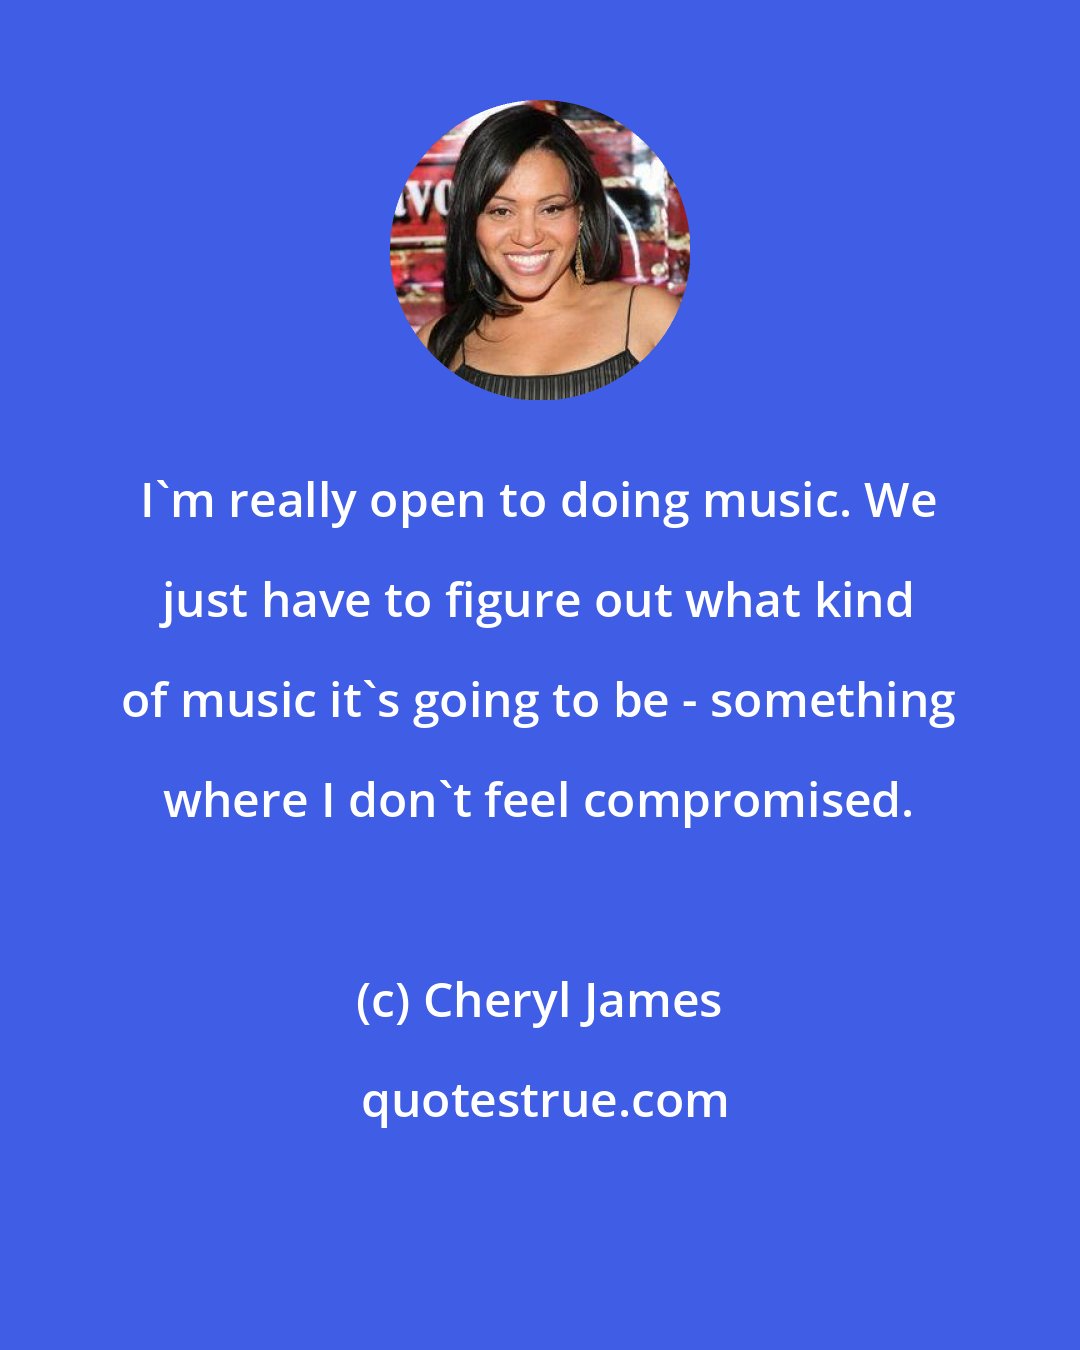 Cheryl James: I'm really open to doing music. We just have to figure out what kind of music it's going to be - something where I don't feel compromised.